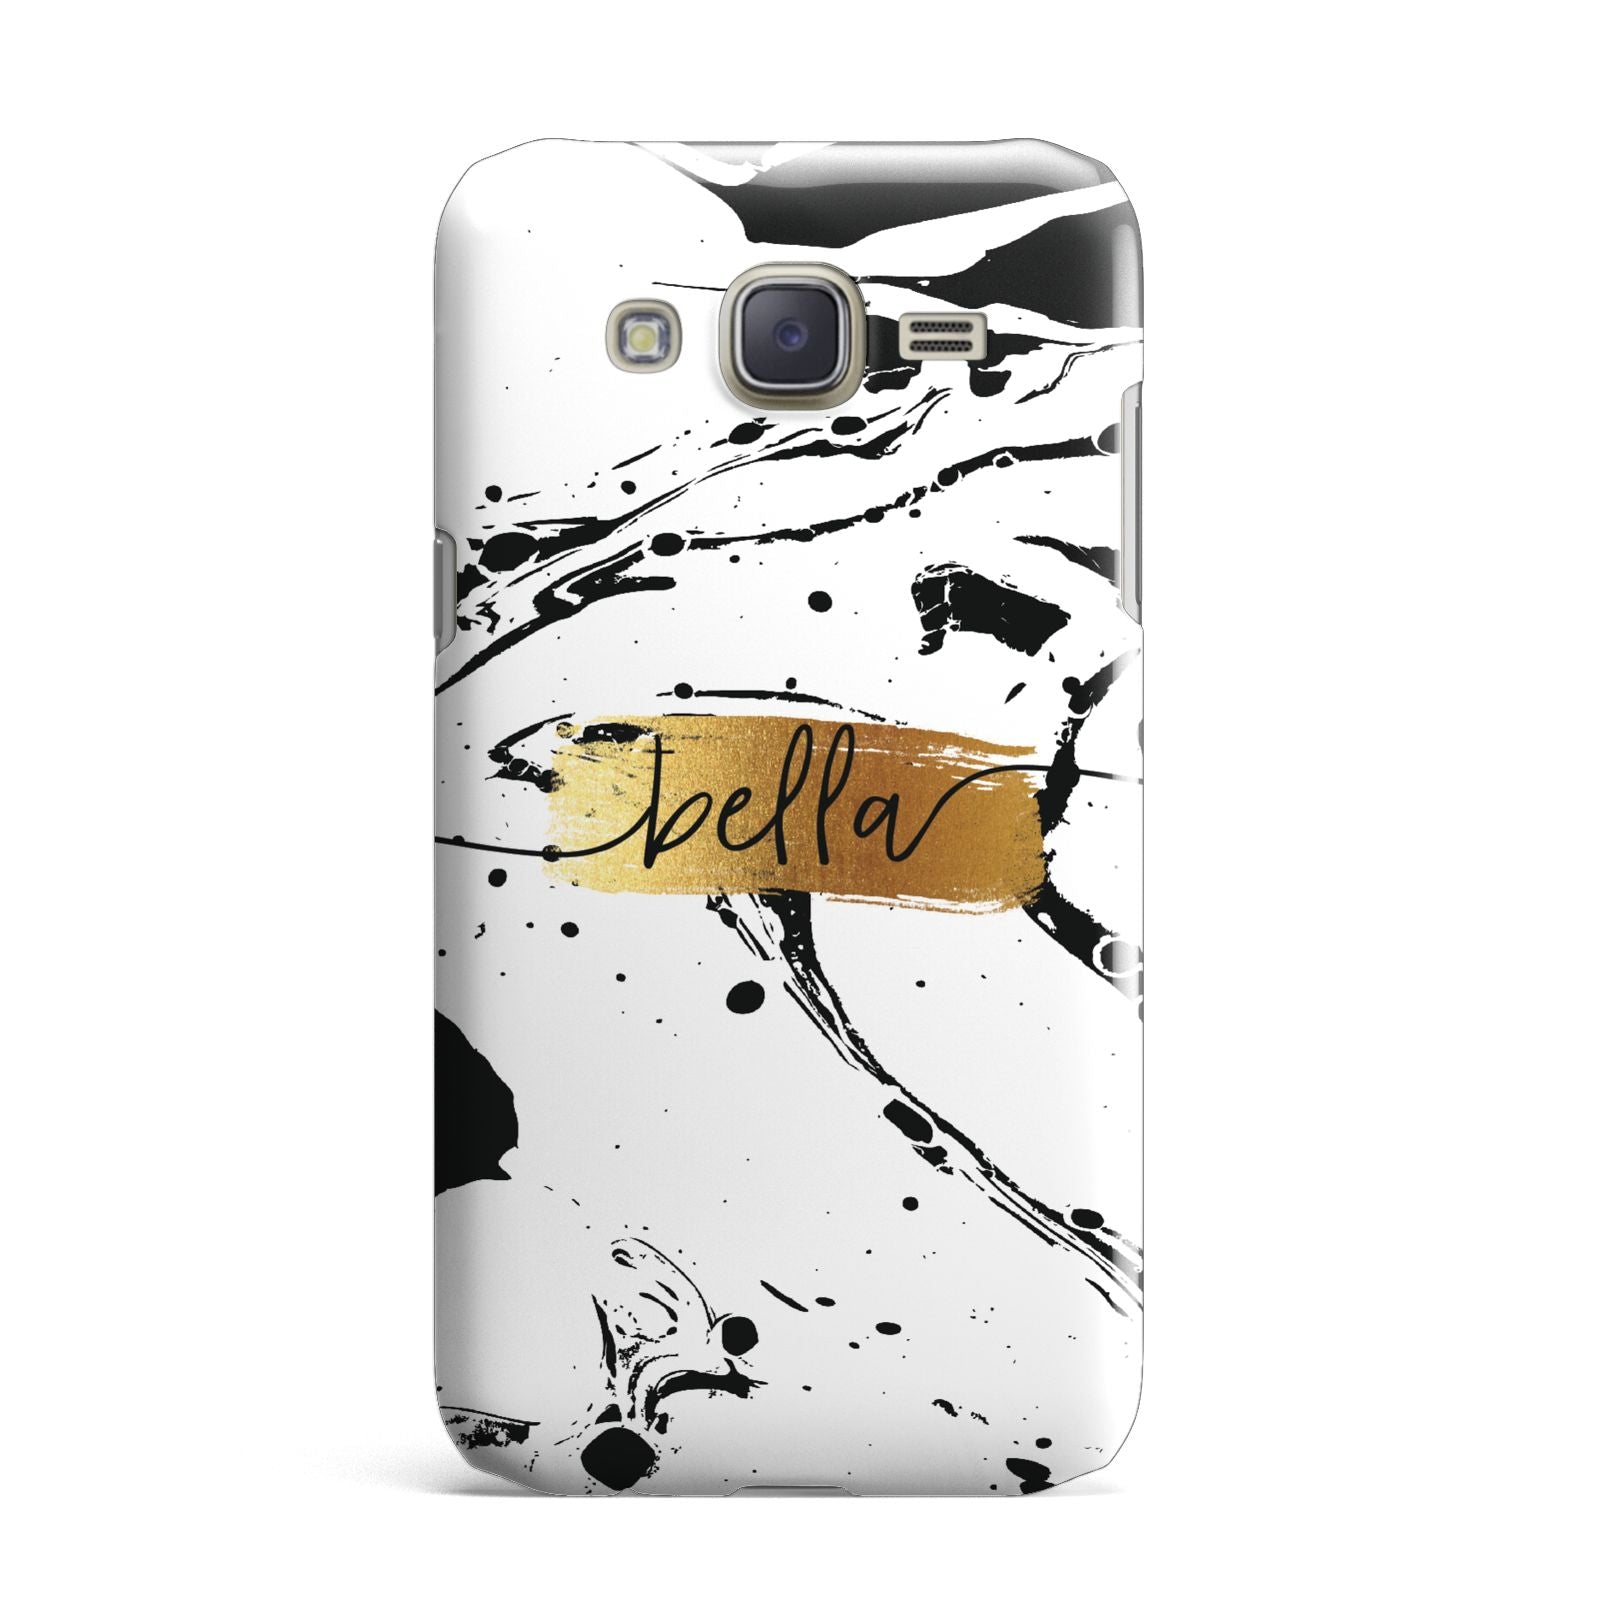 Personalised White Gold Swirl Marble Samsung Galaxy J7 Case